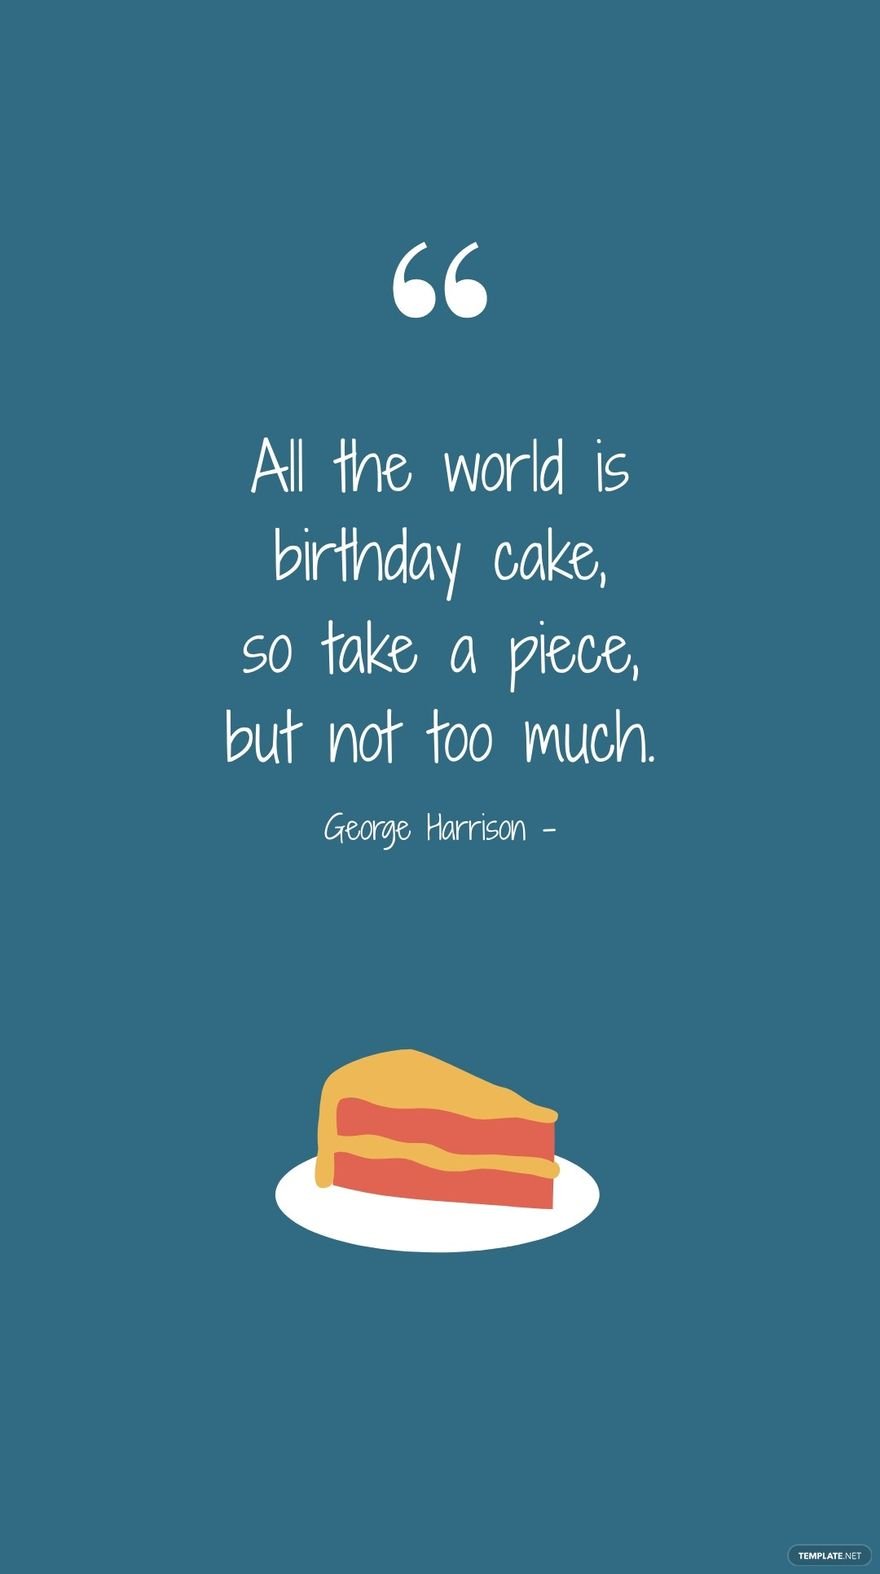 George Harrison - All the world is birthday cake, so take a piece, but not too much.